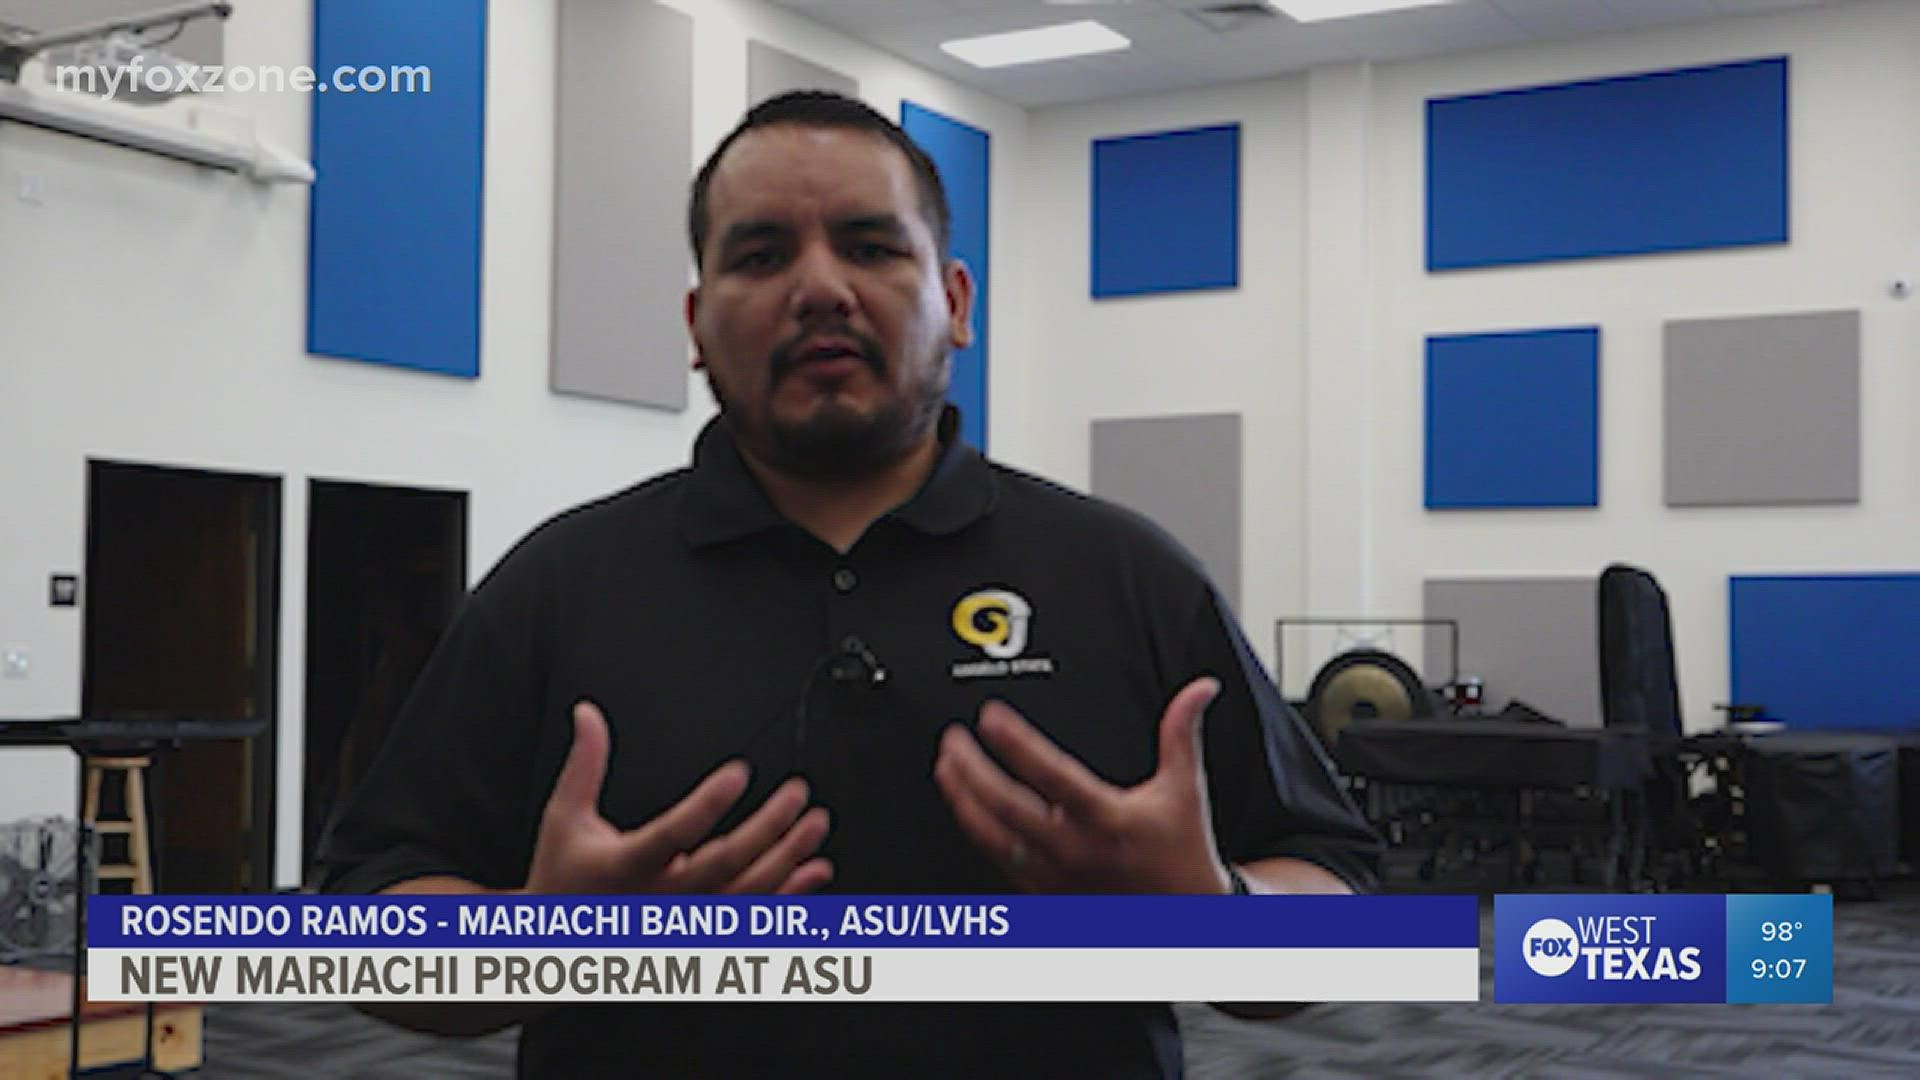 Rosendo Ramos has been working to spread the joy of mariachi music across West Texas for more than a decade now. Now, he's bringing it back to ASU.